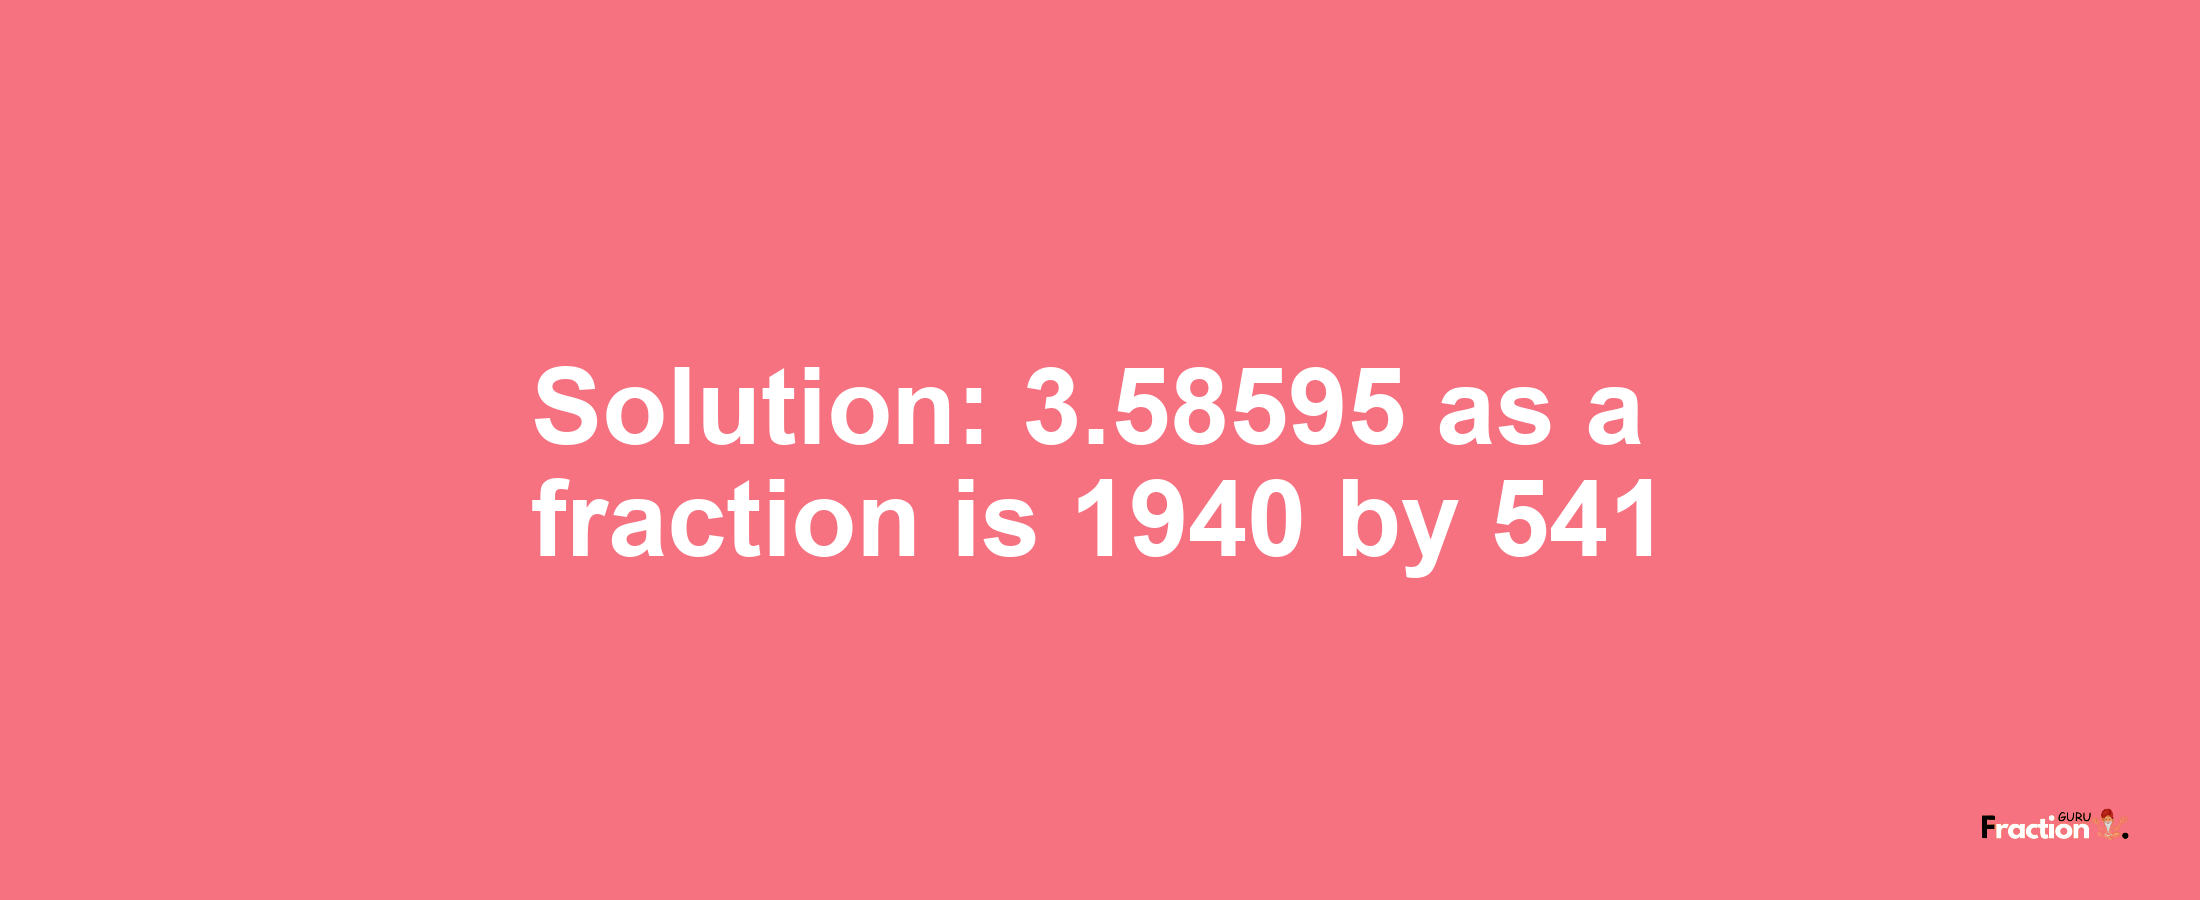 Solution:3.58595 as a fraction is 1940/541